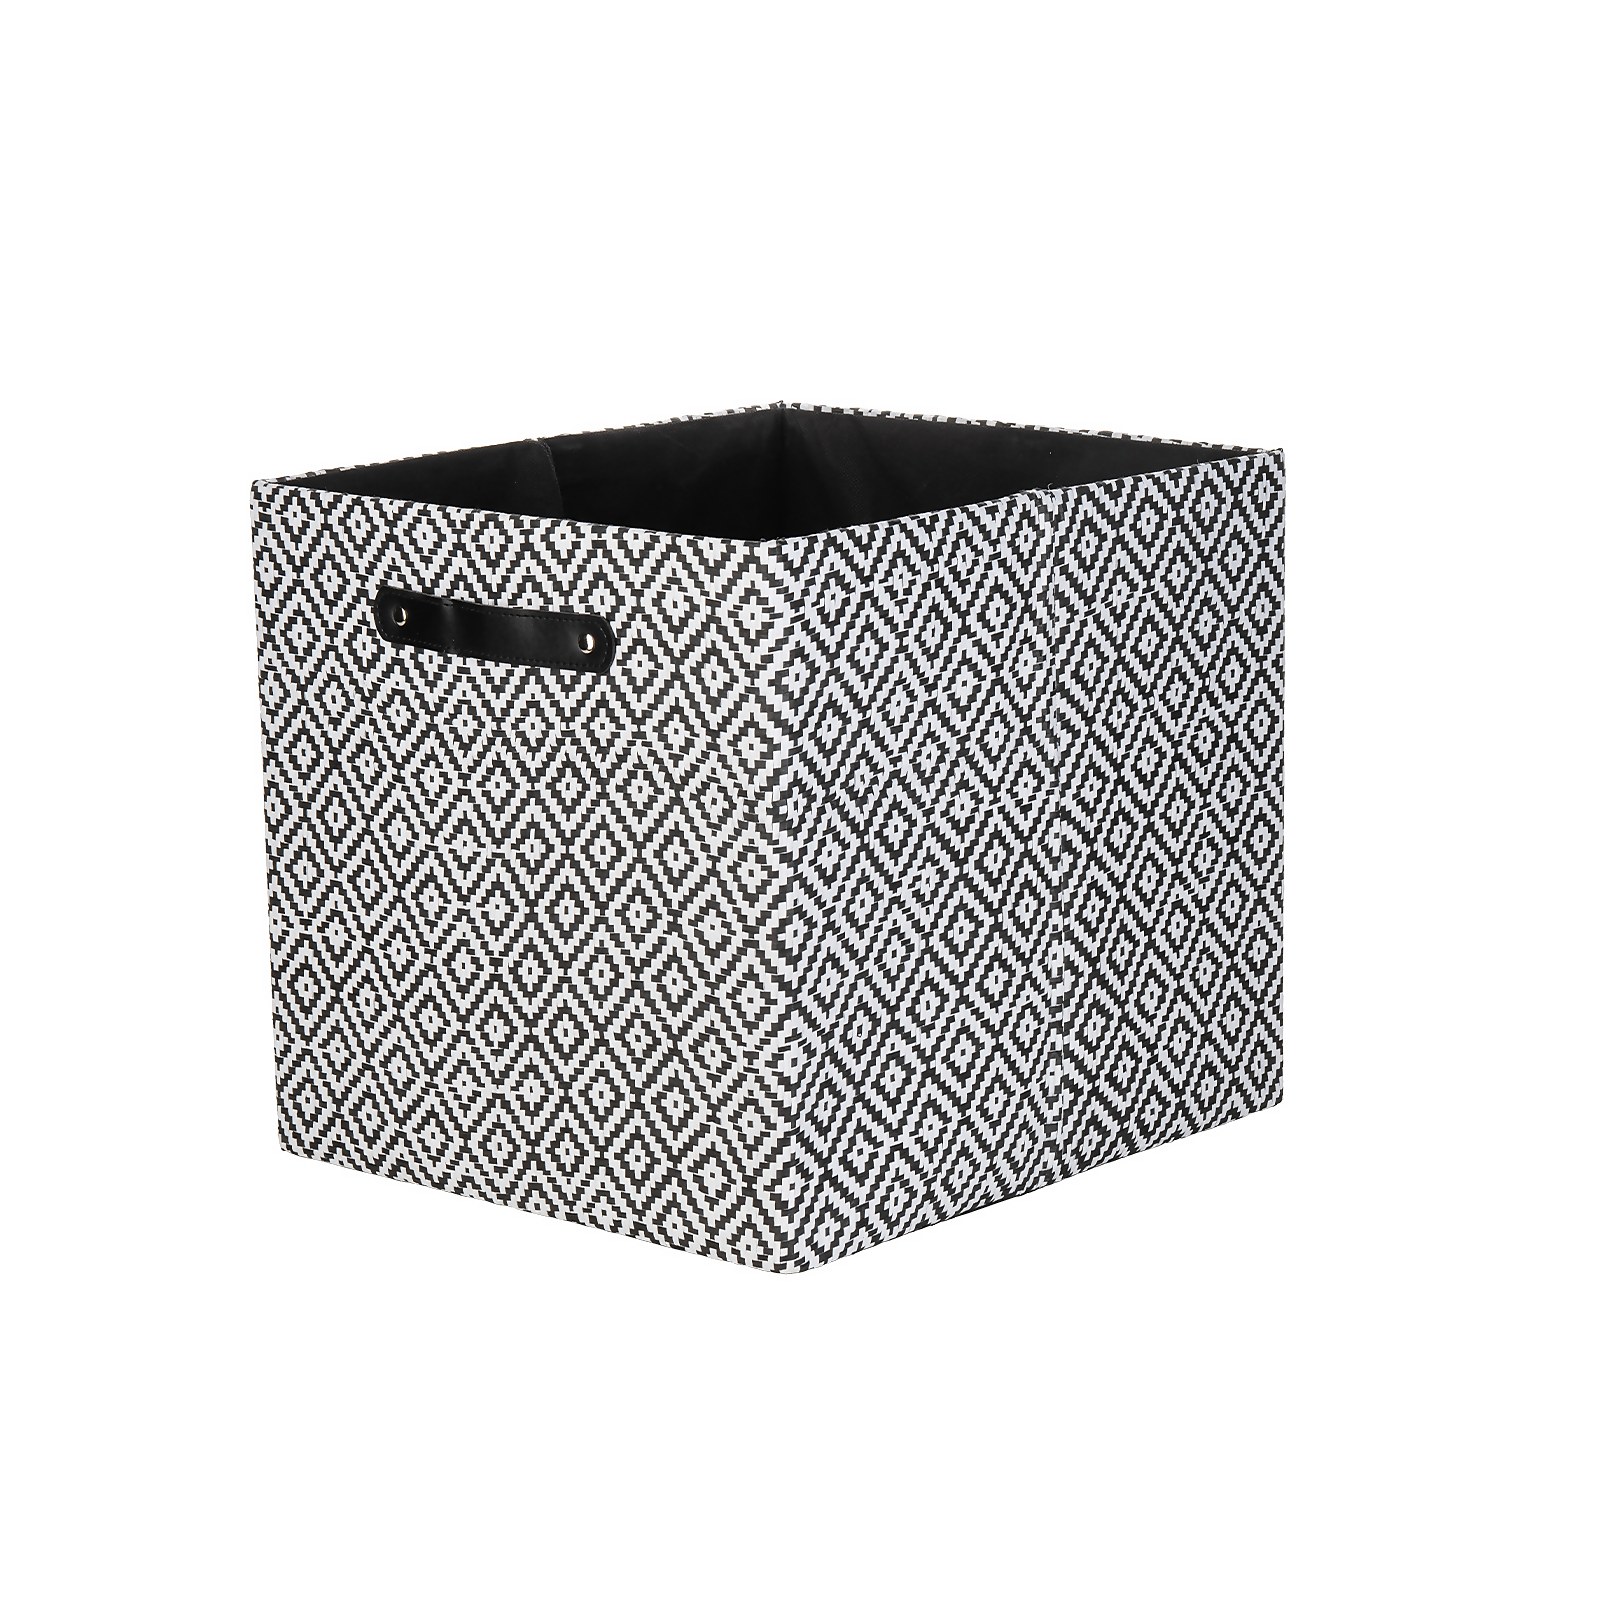 Photo of Living Elements Clever Cube Patterned Fabric Insert - Black Jacquard